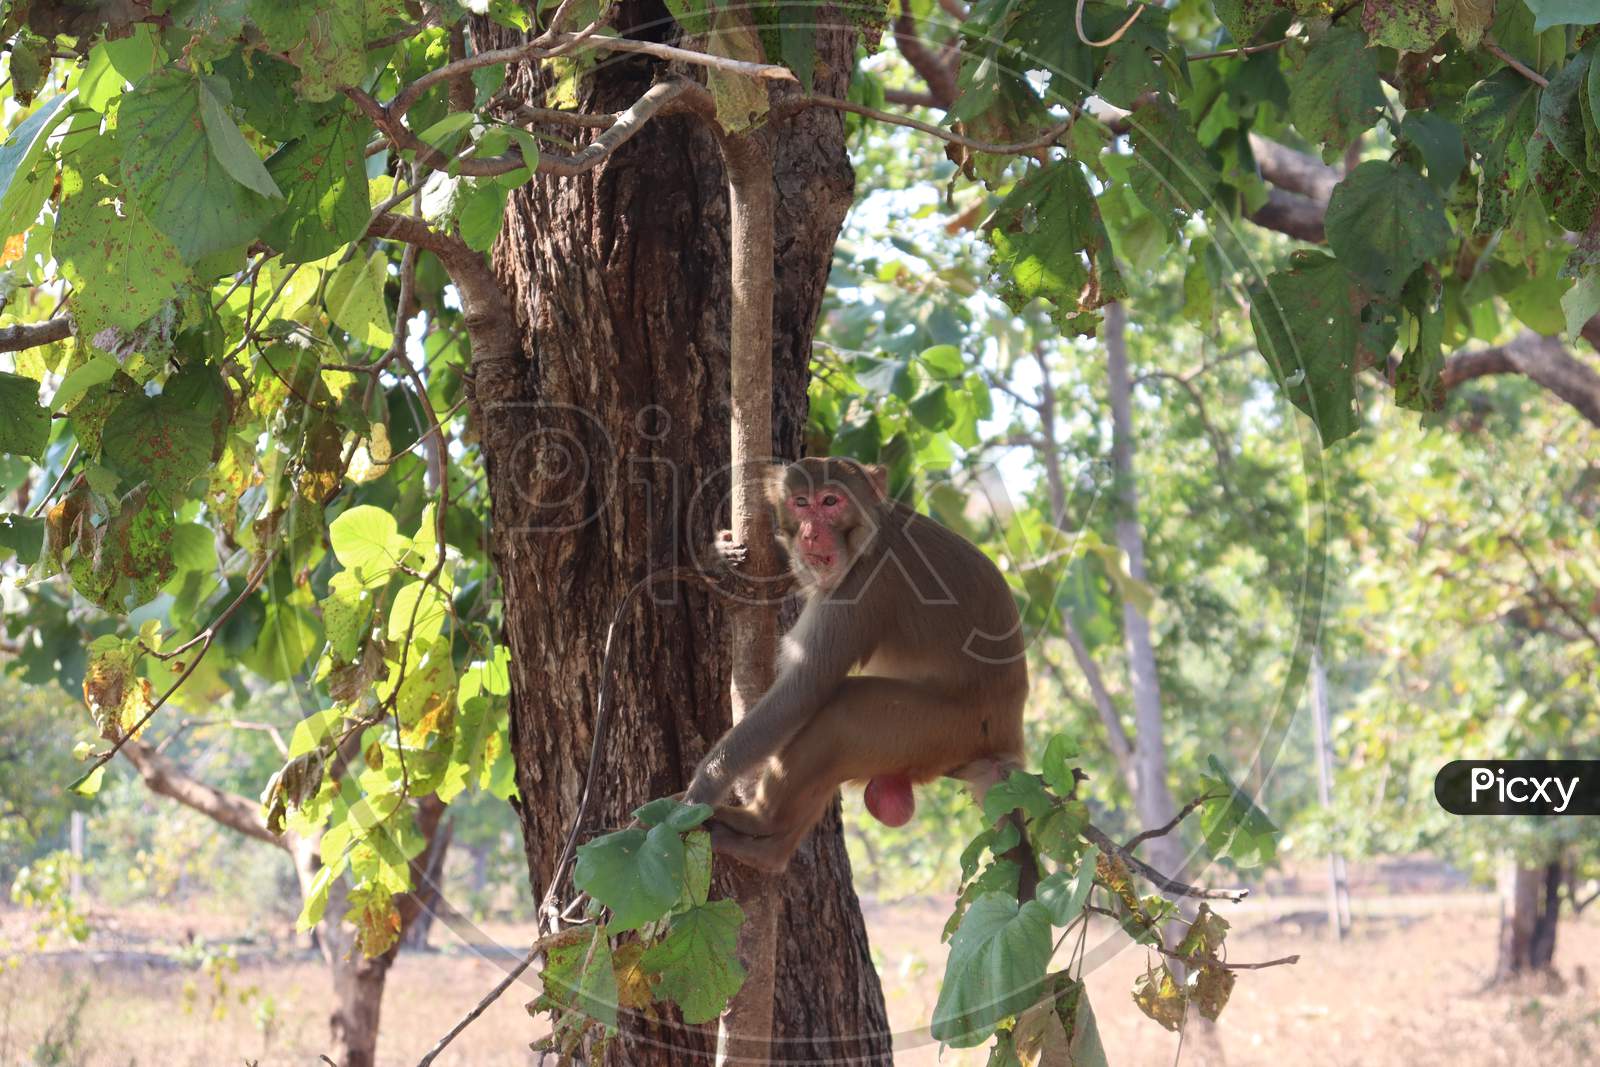 A monkey is Sit on the tree branch